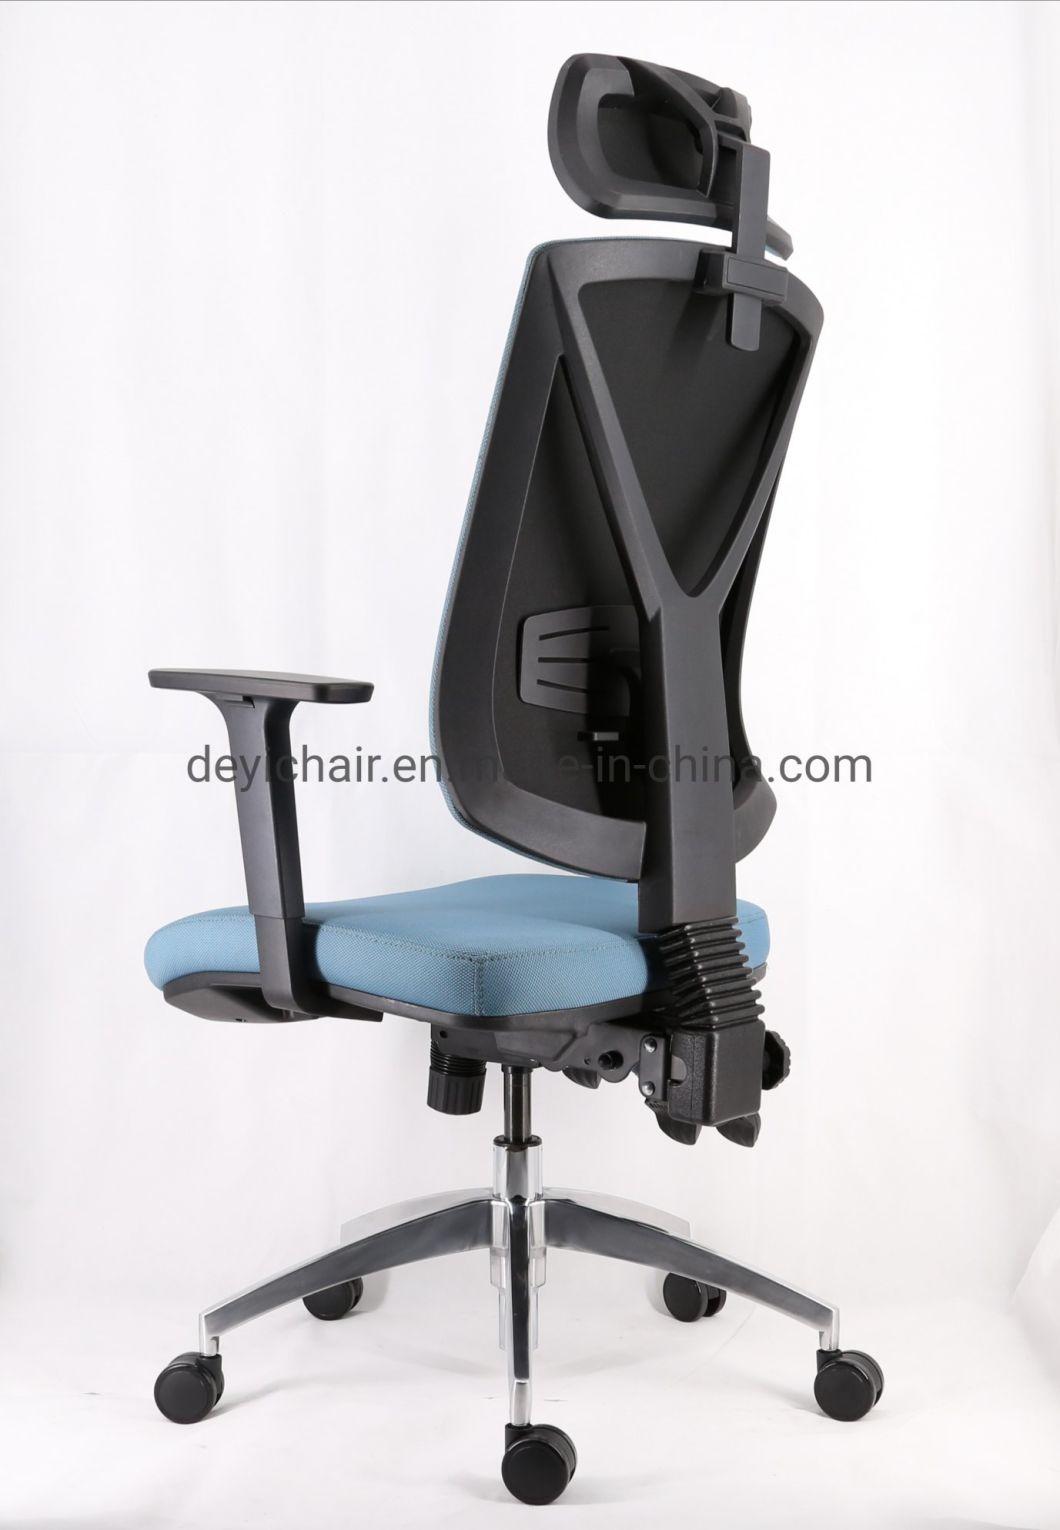 3 Lever Heavy Duty Mechanism Aluminum Base with Adjustable Arms and Lumbar Support and with Headrest High Back Chair